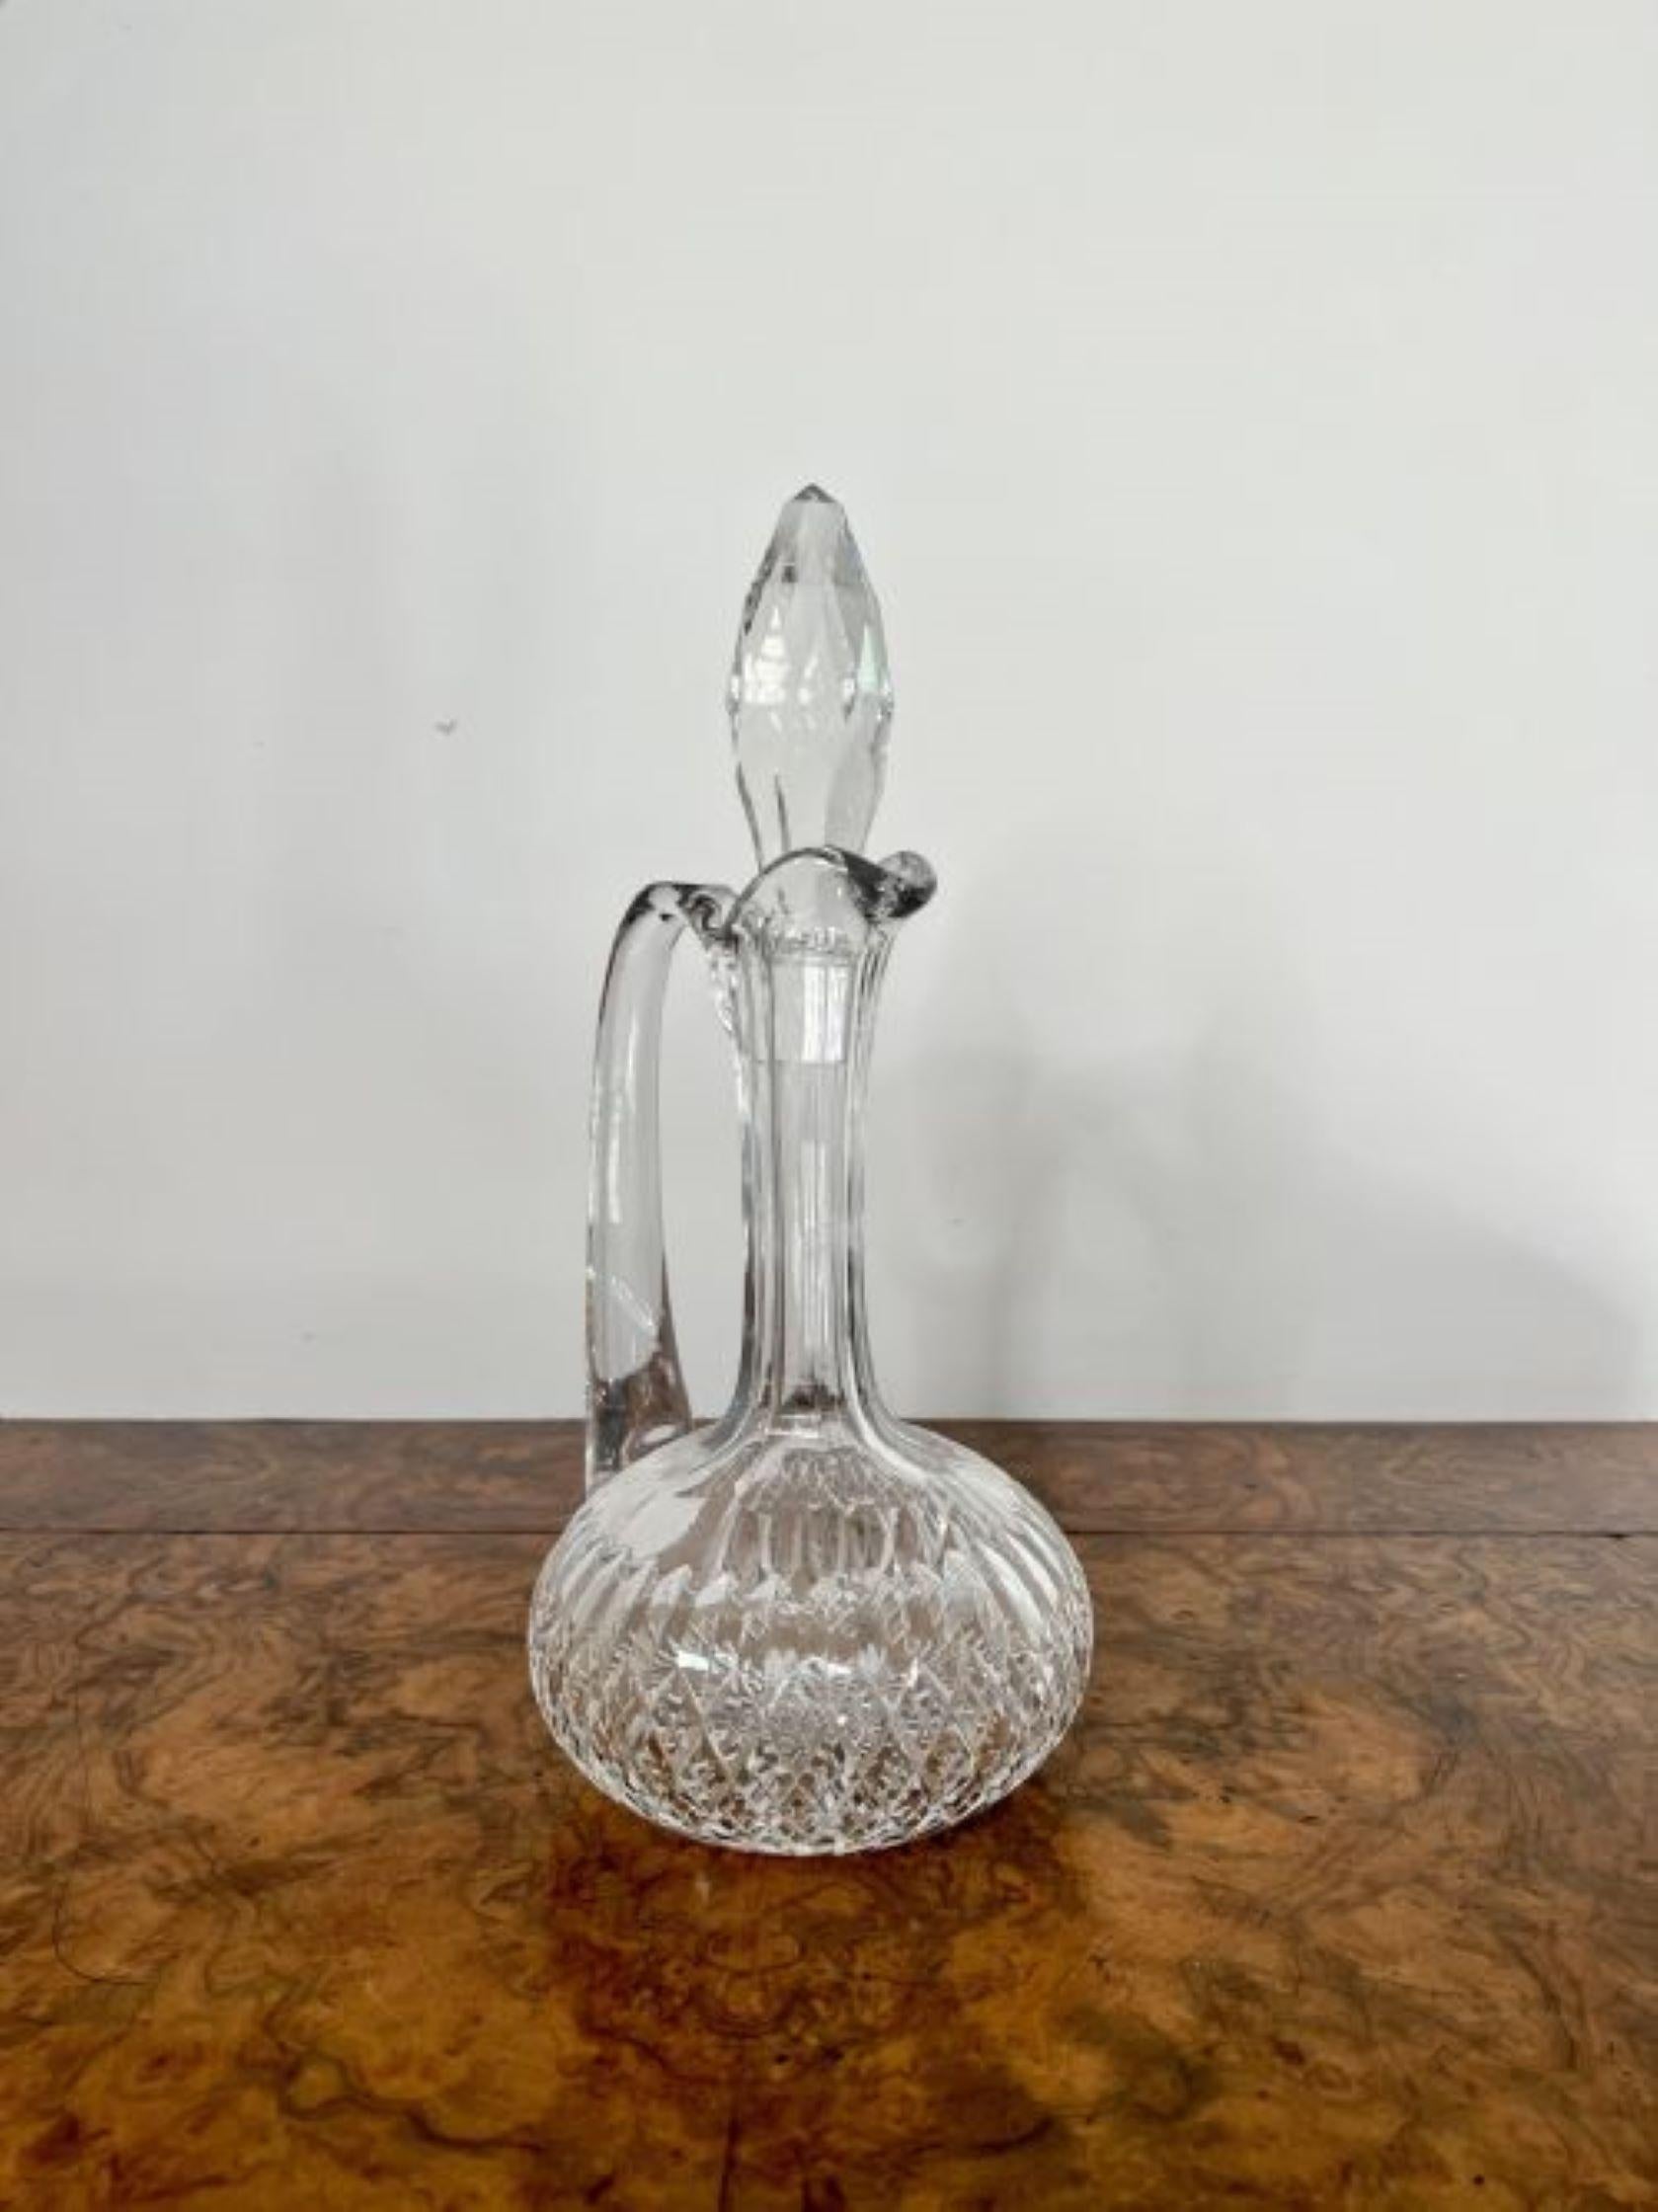 Quality antique Edwardian cut glass ewer having a quality antique Edwardian cut glass ewer with a shaped handle to the back and the original cut glass stopper.